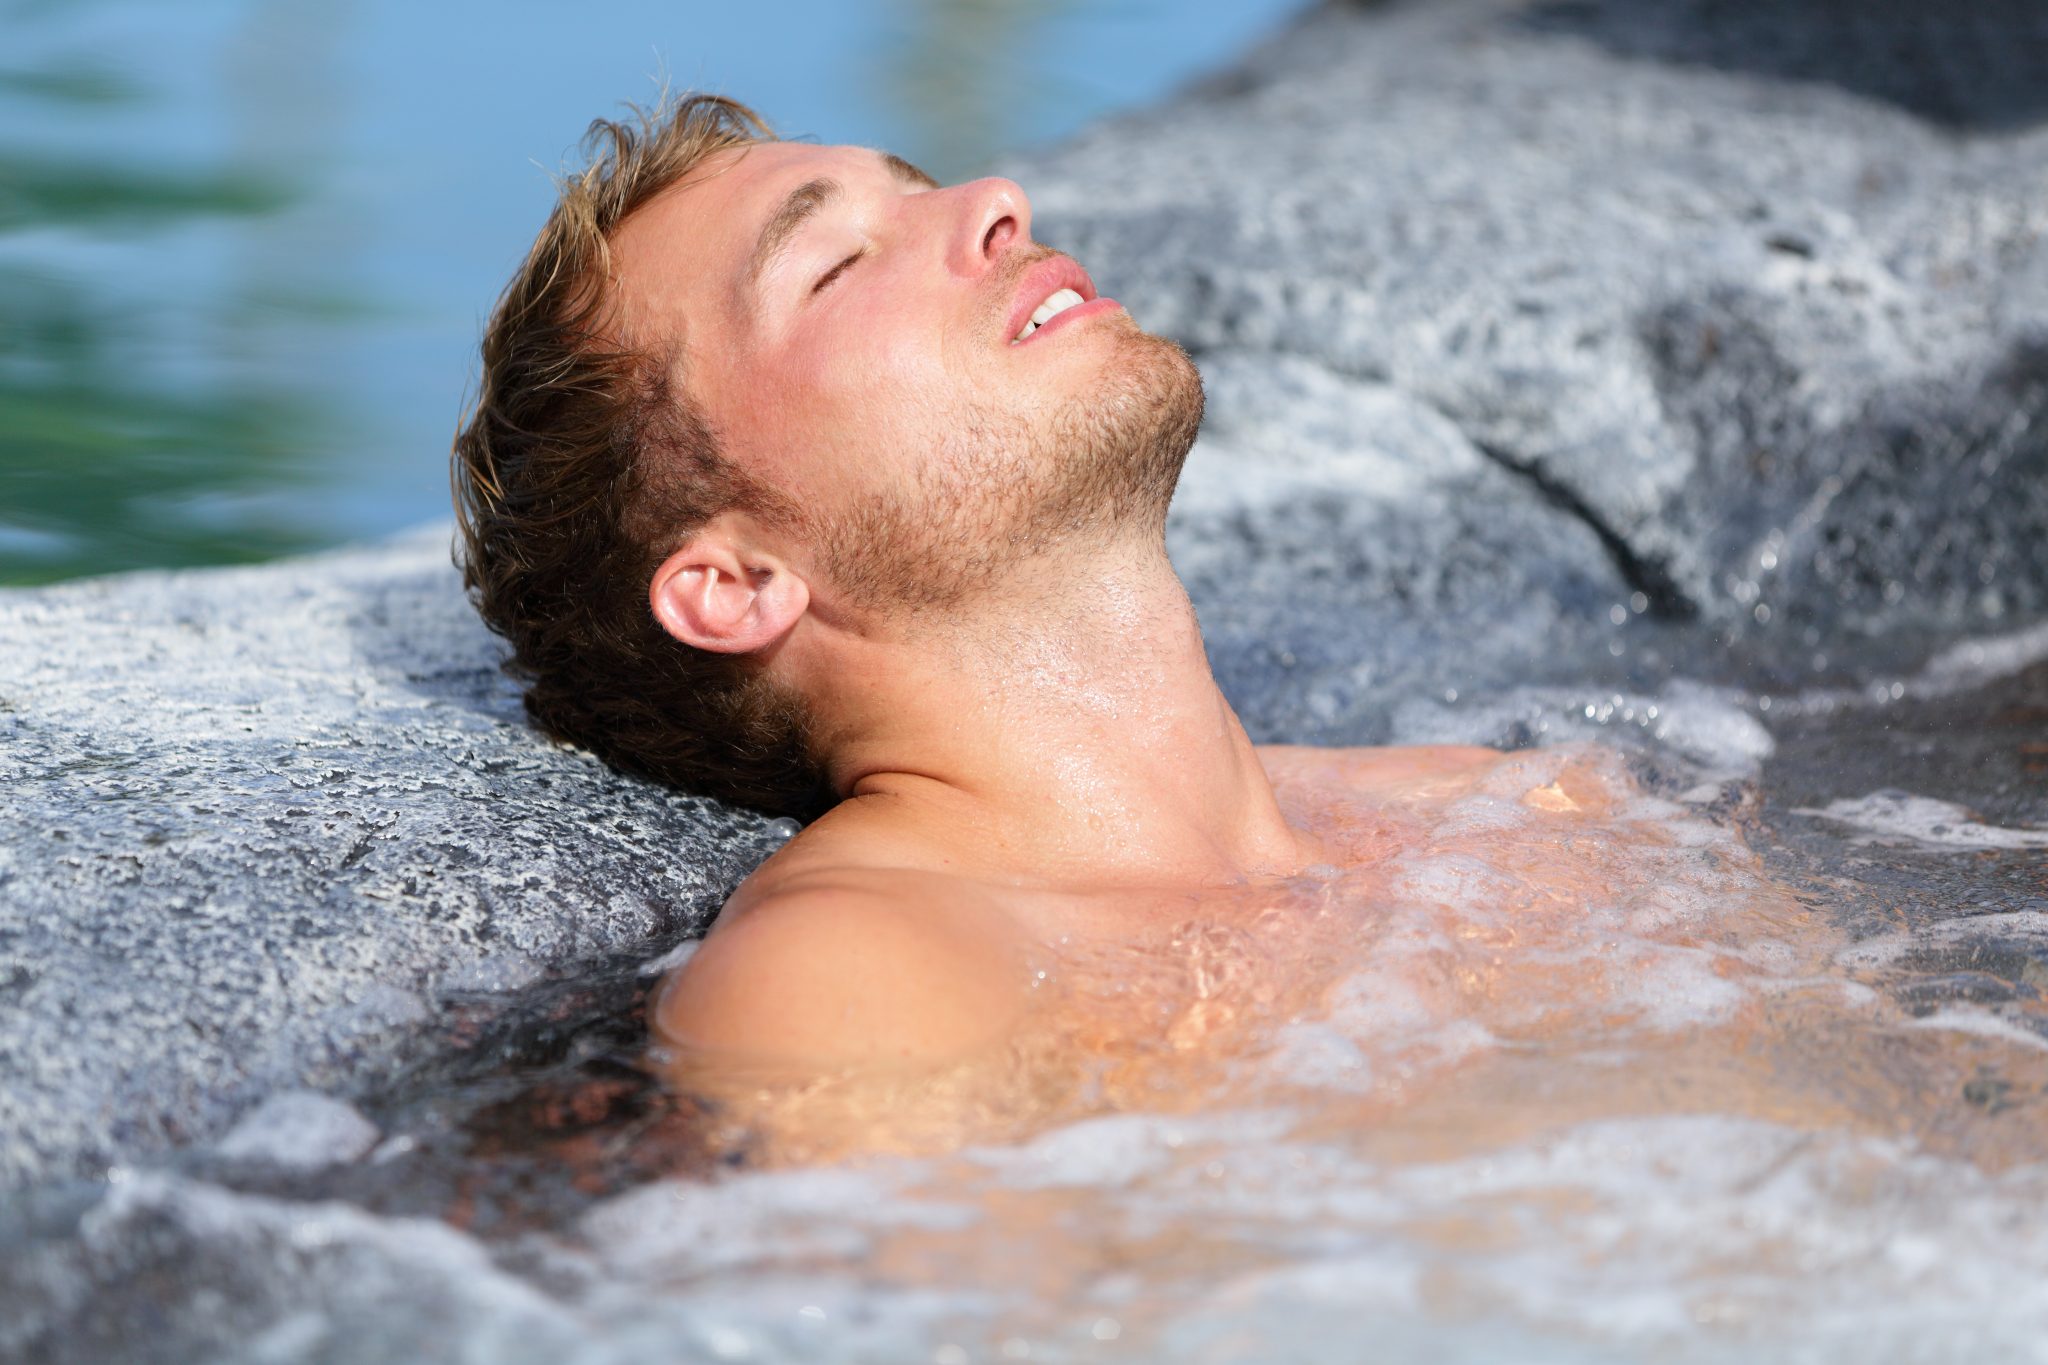 A man bathing in a jacuzzi with his eyes closed